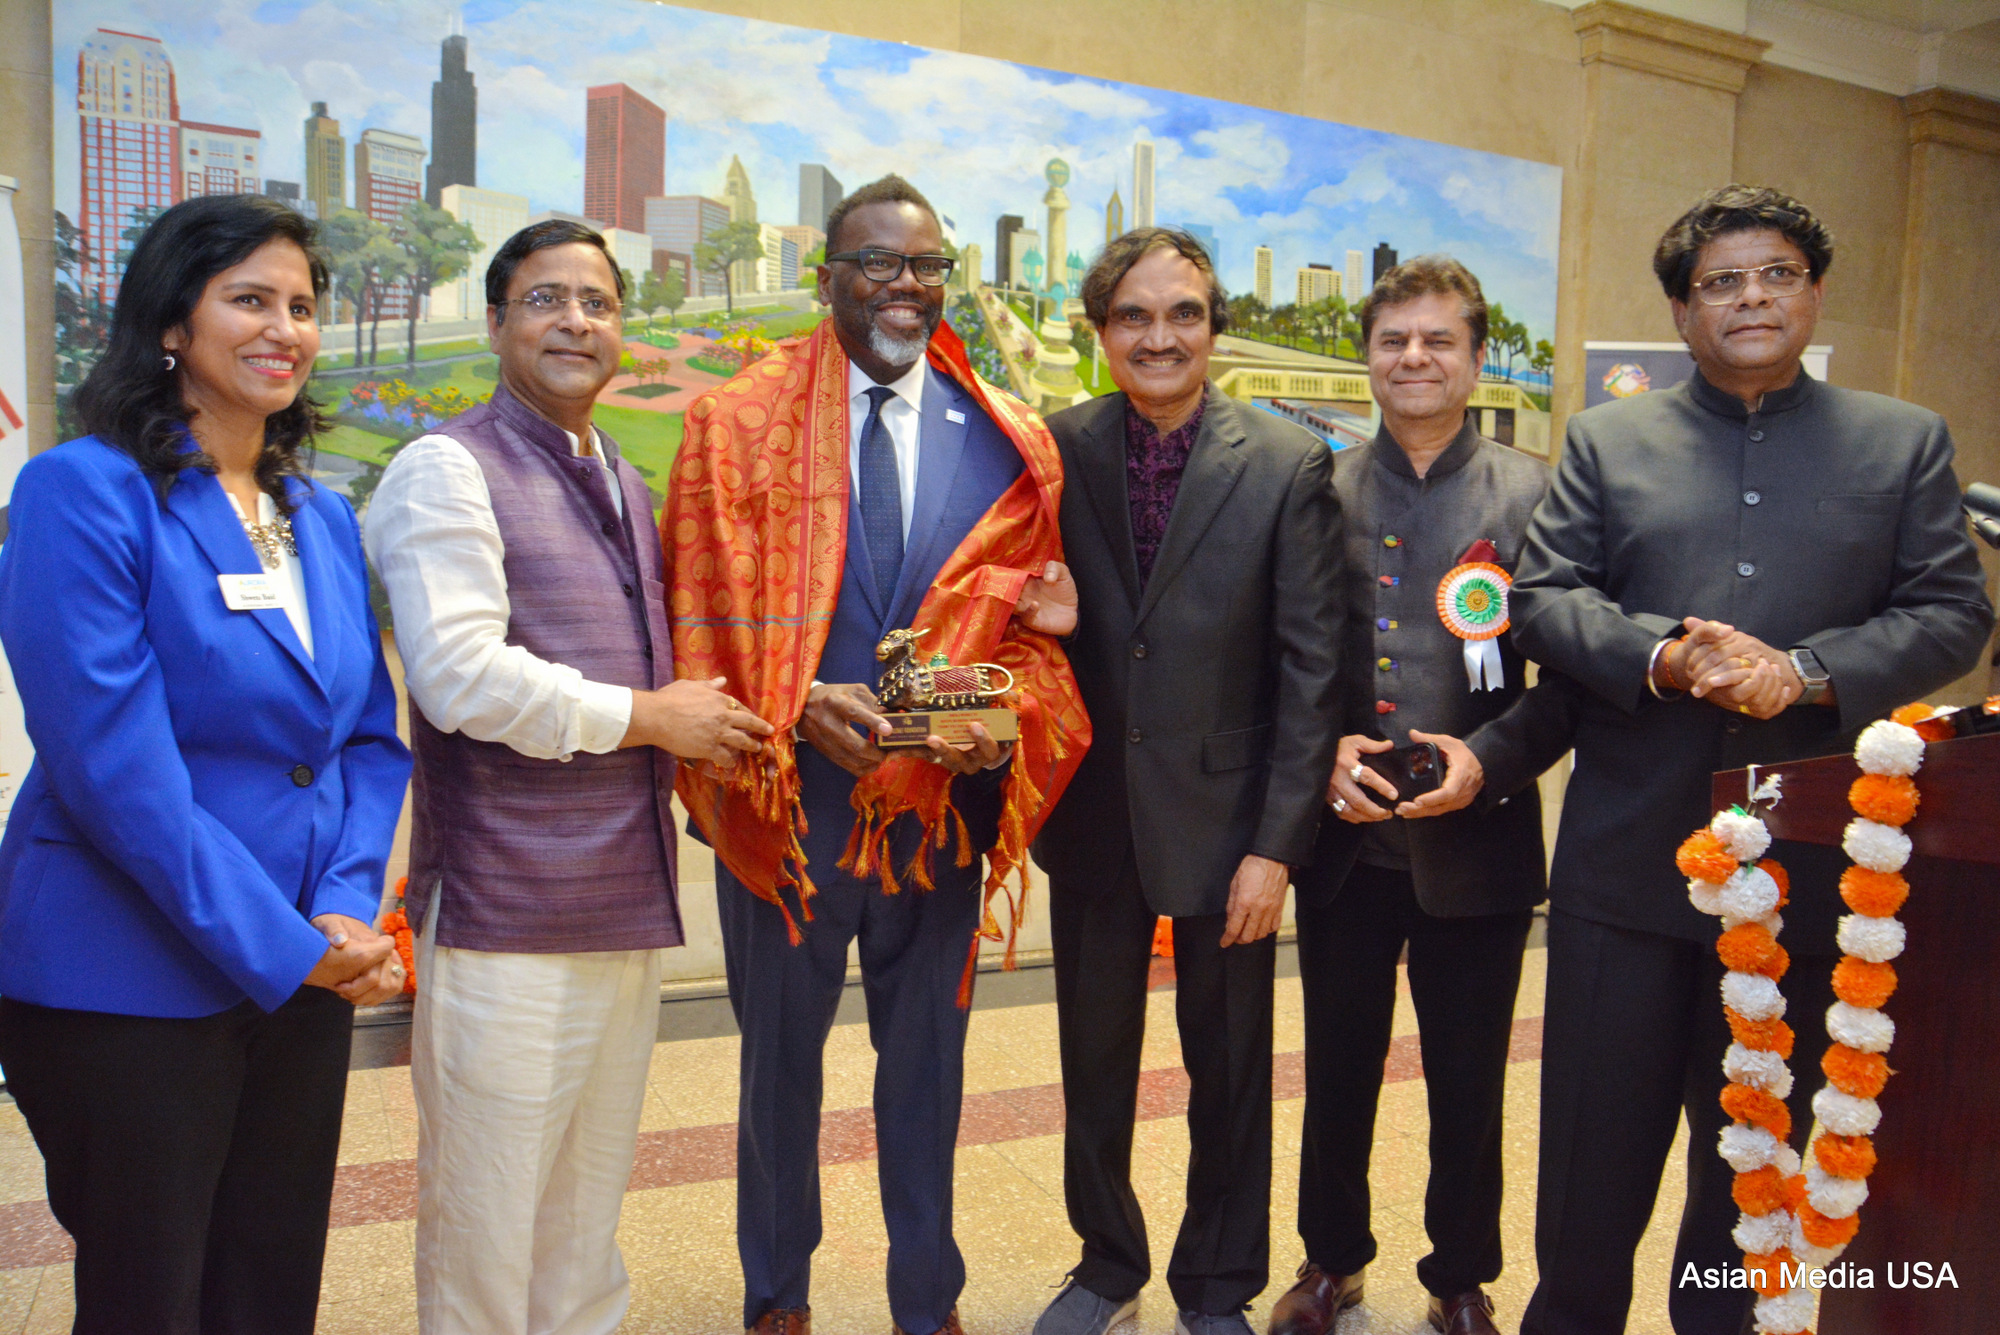 Chicago Shines Bright with Diwali Celebration hosted by Mayor Brandon Johnson and Indian American Business Council